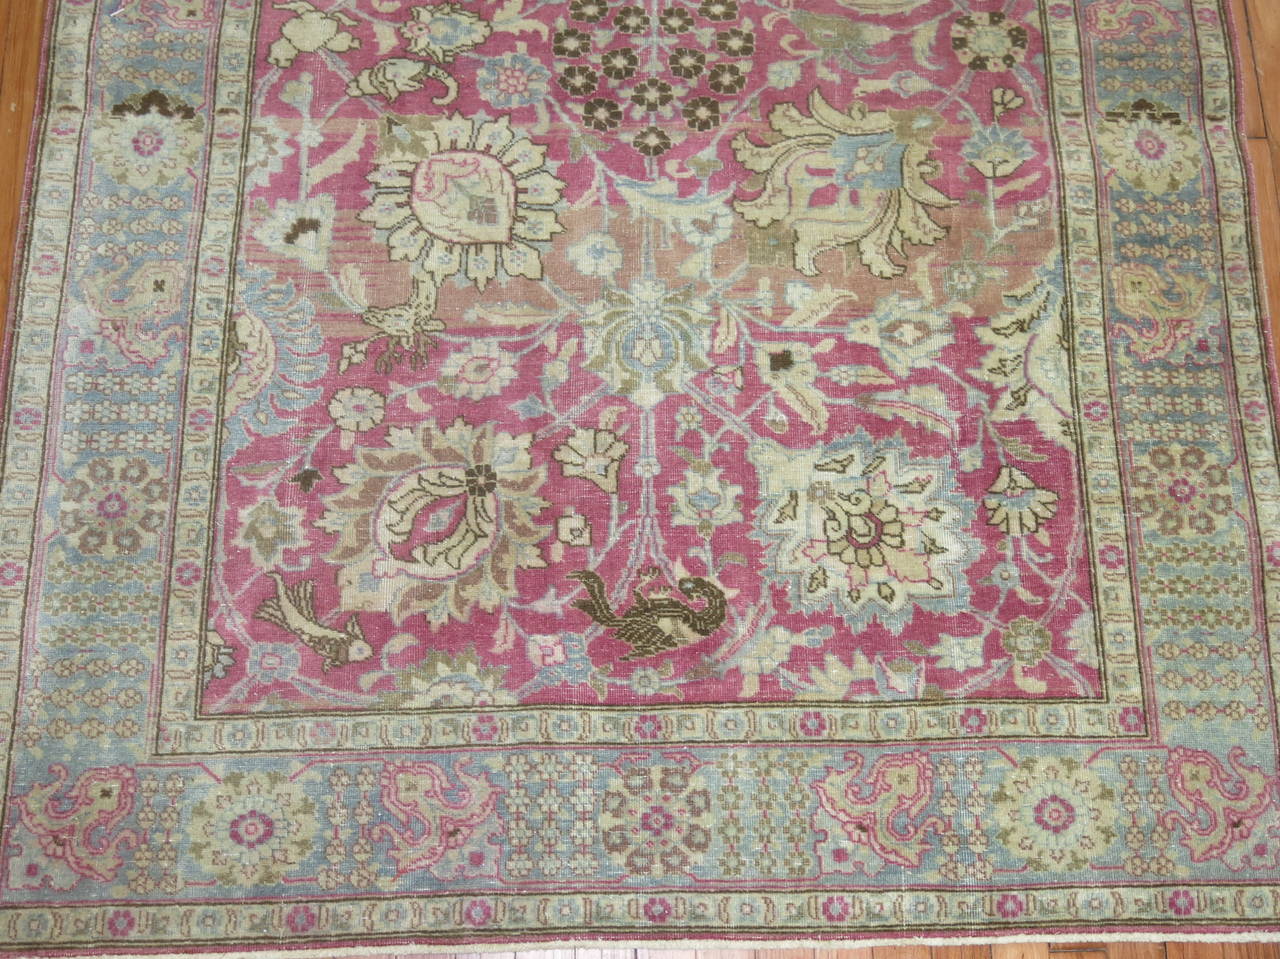 Authentic Persian Tabriz featuring an abrashed fuchsia colored background.